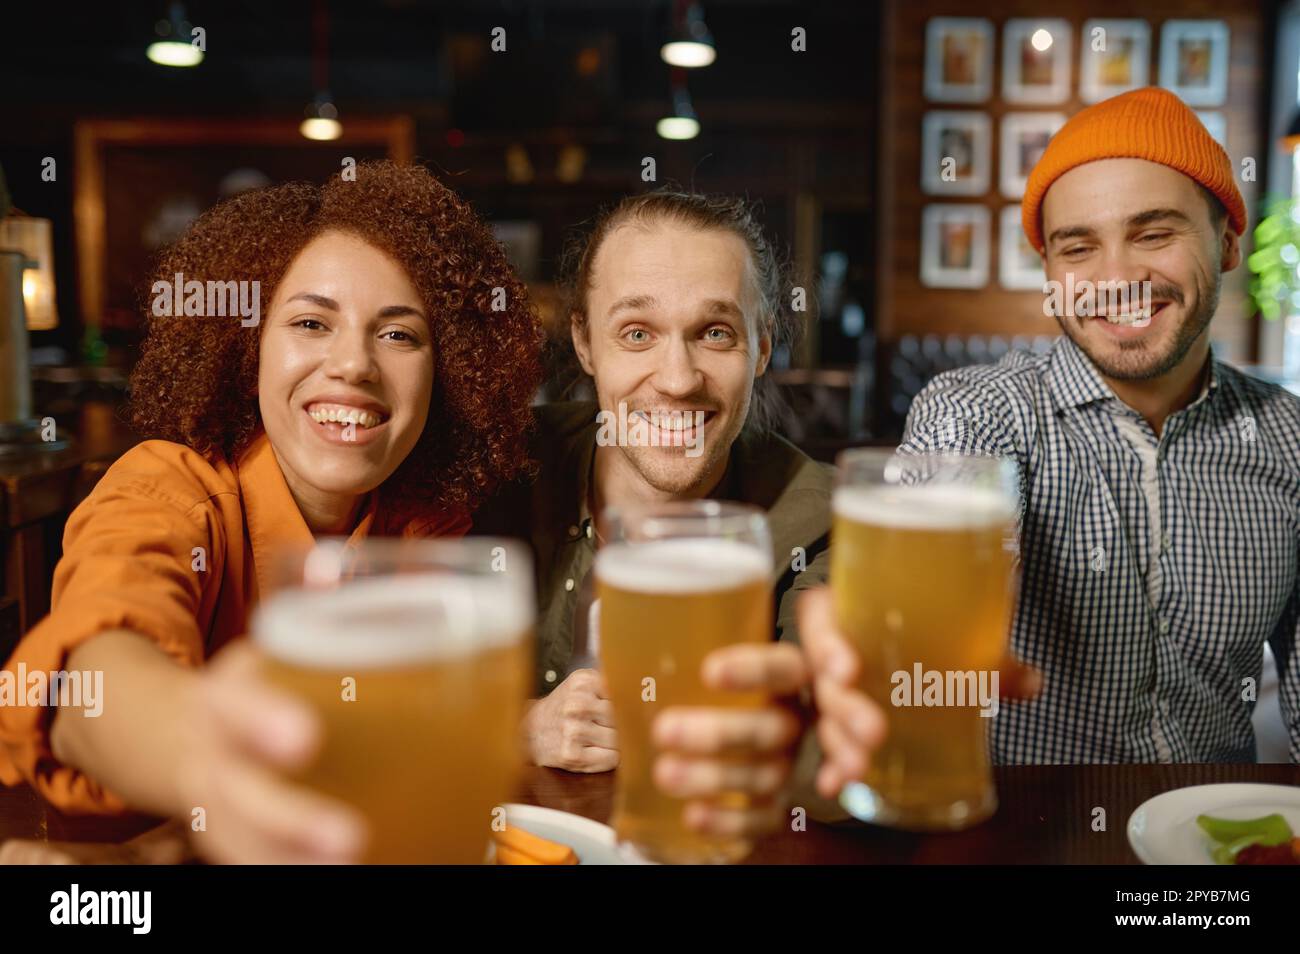 Group of young people smiling at camera and clinking glasses Stock Photo